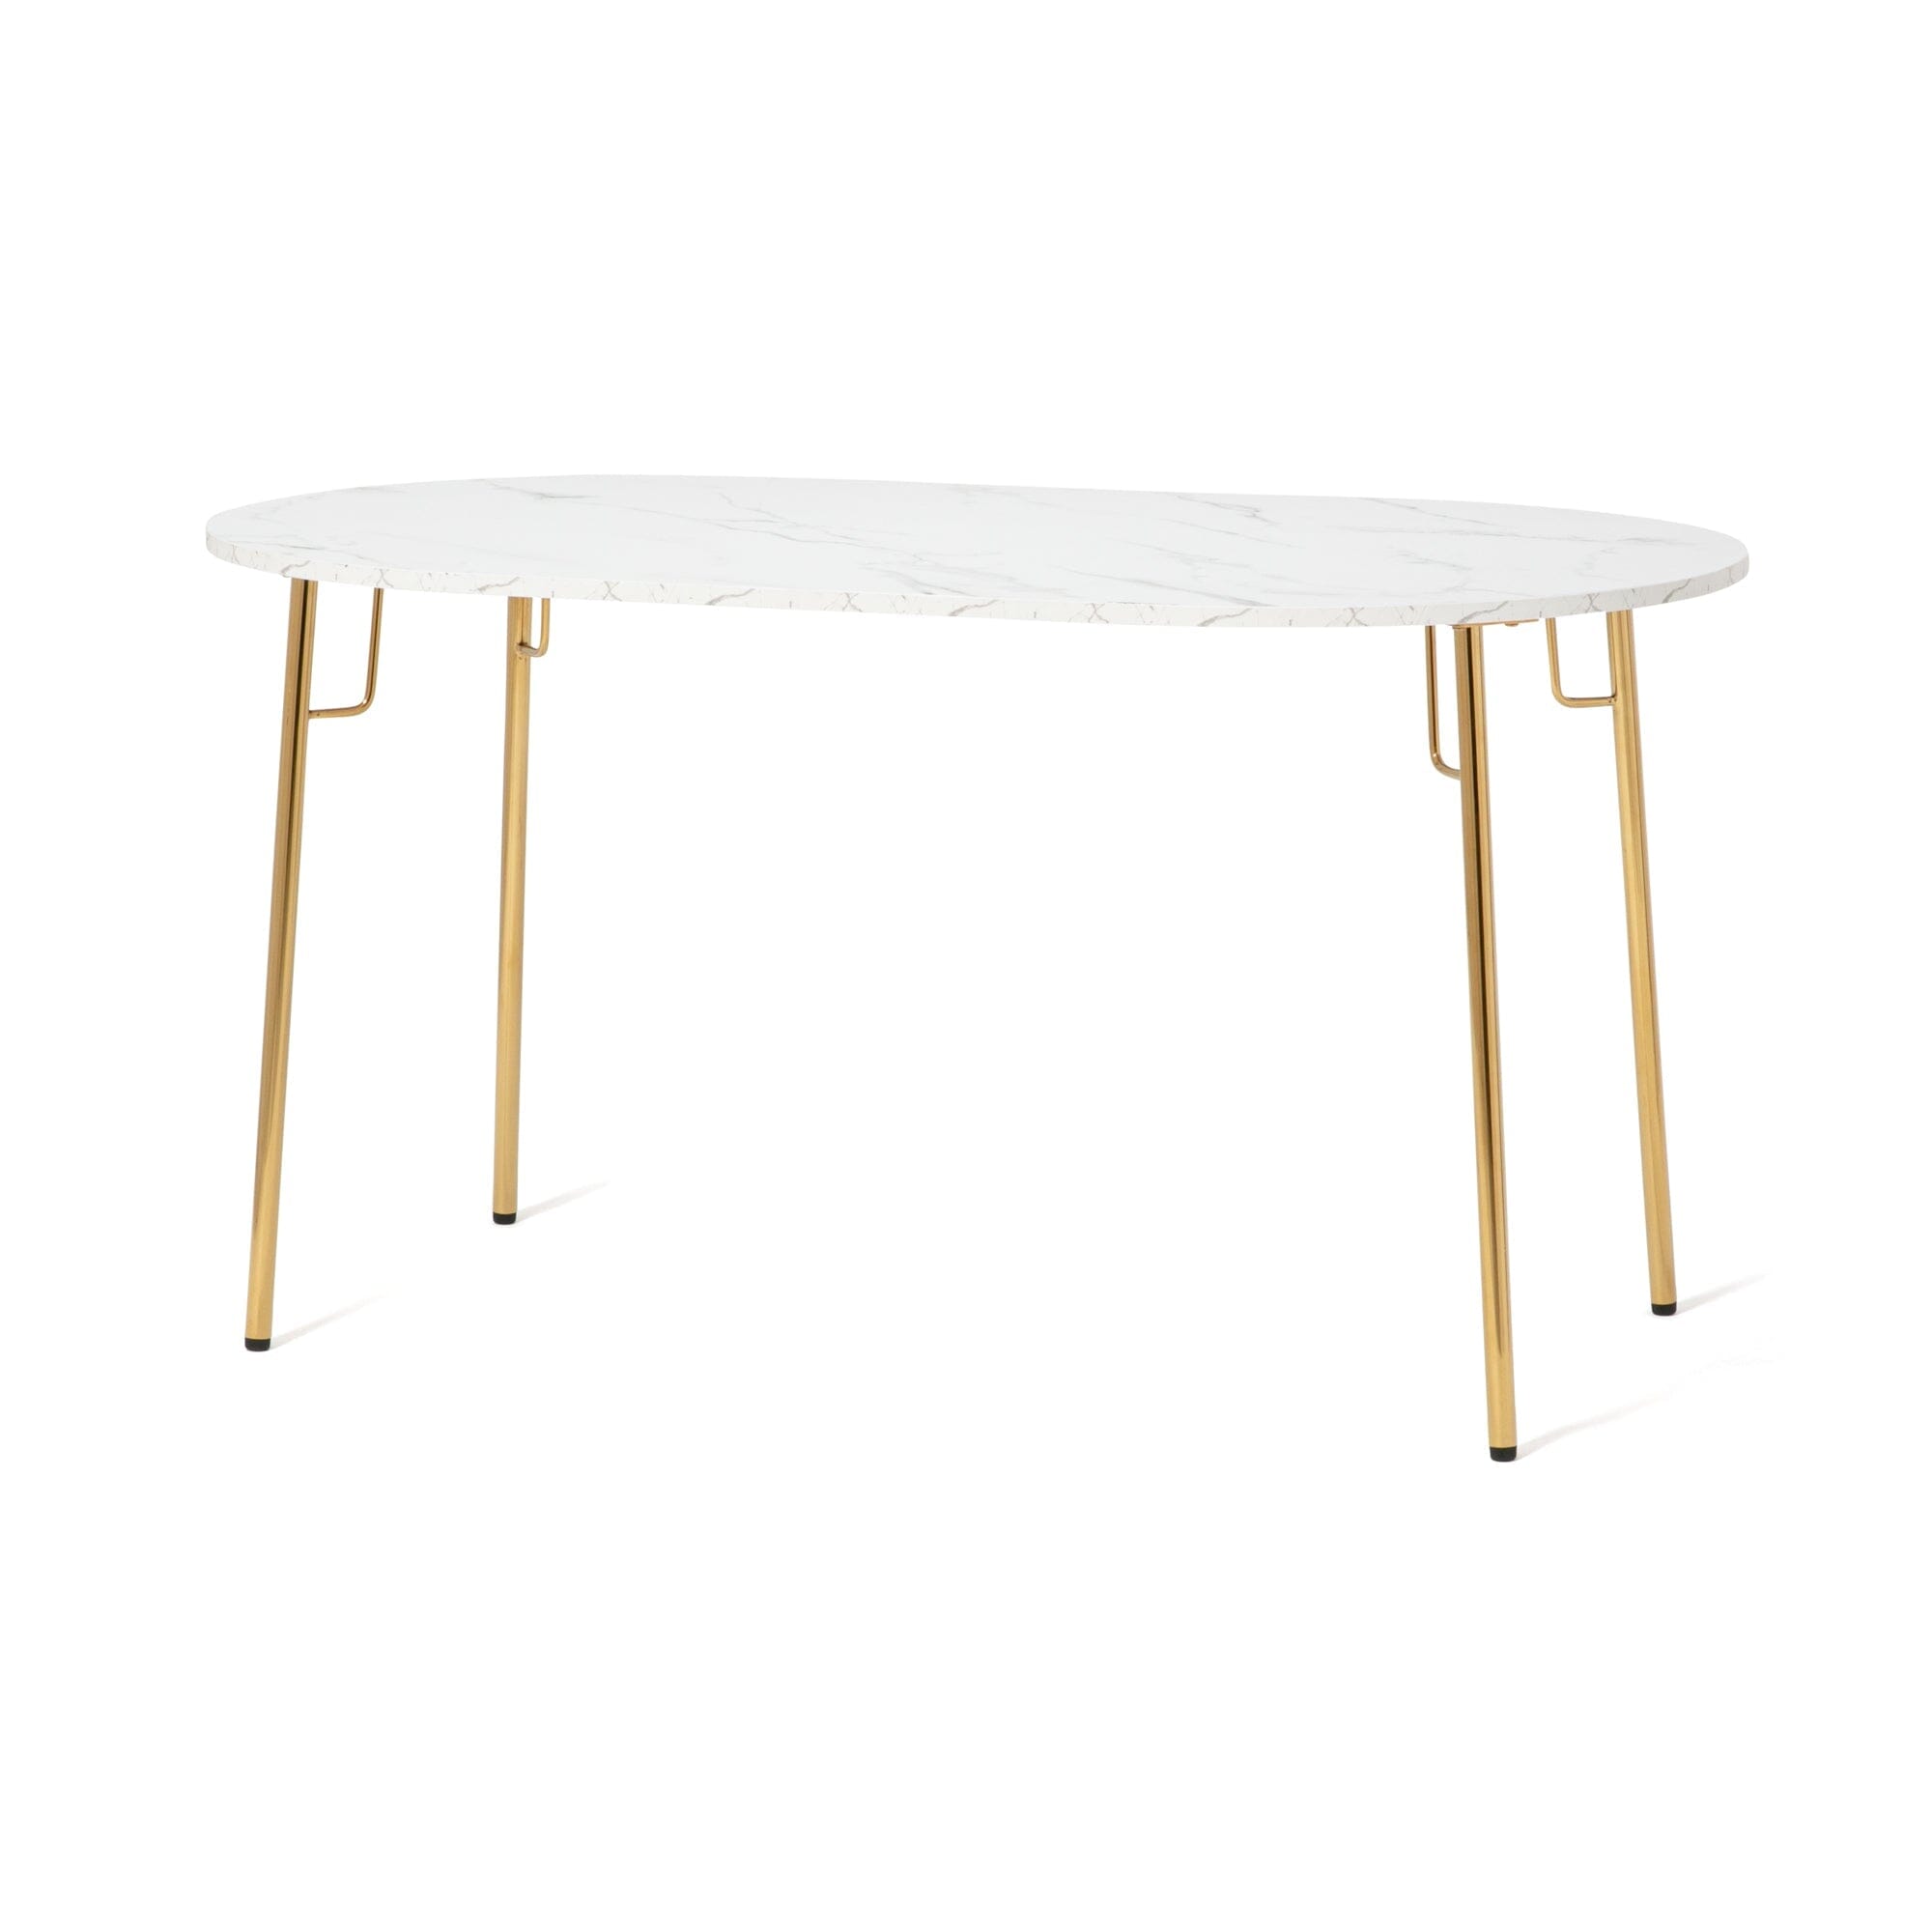 Belle Dining Table 1400 × 800 × 730 Oval